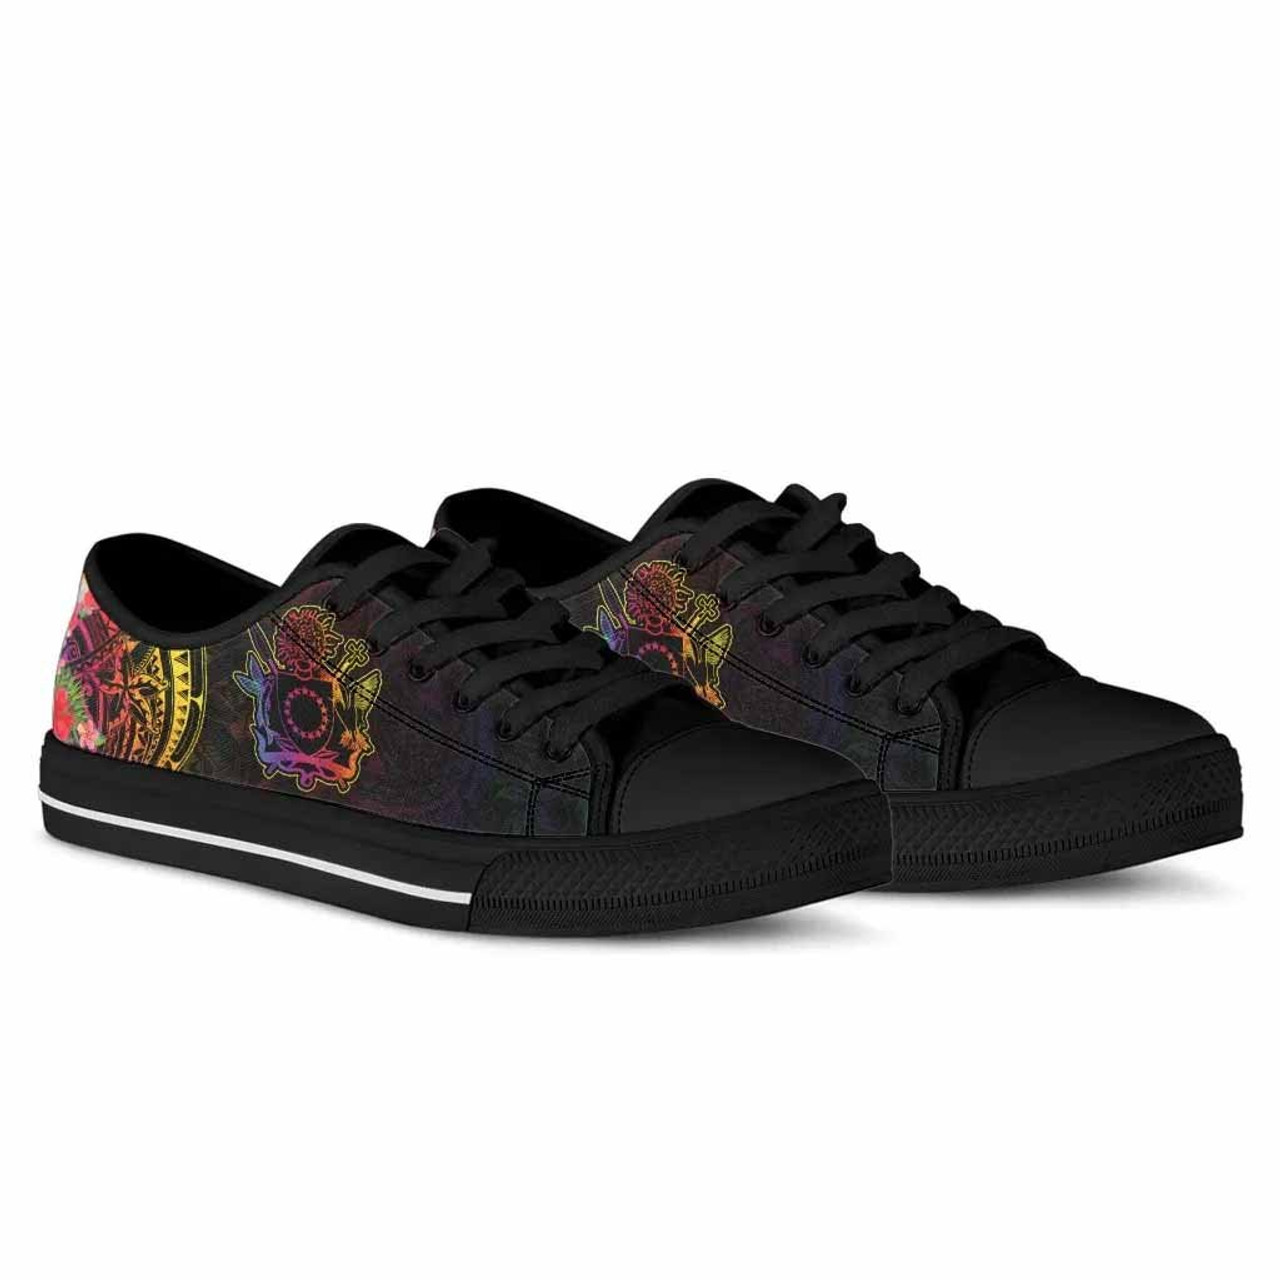 Cook Islands Low Top Shoes - Tropical Hippie Style 2